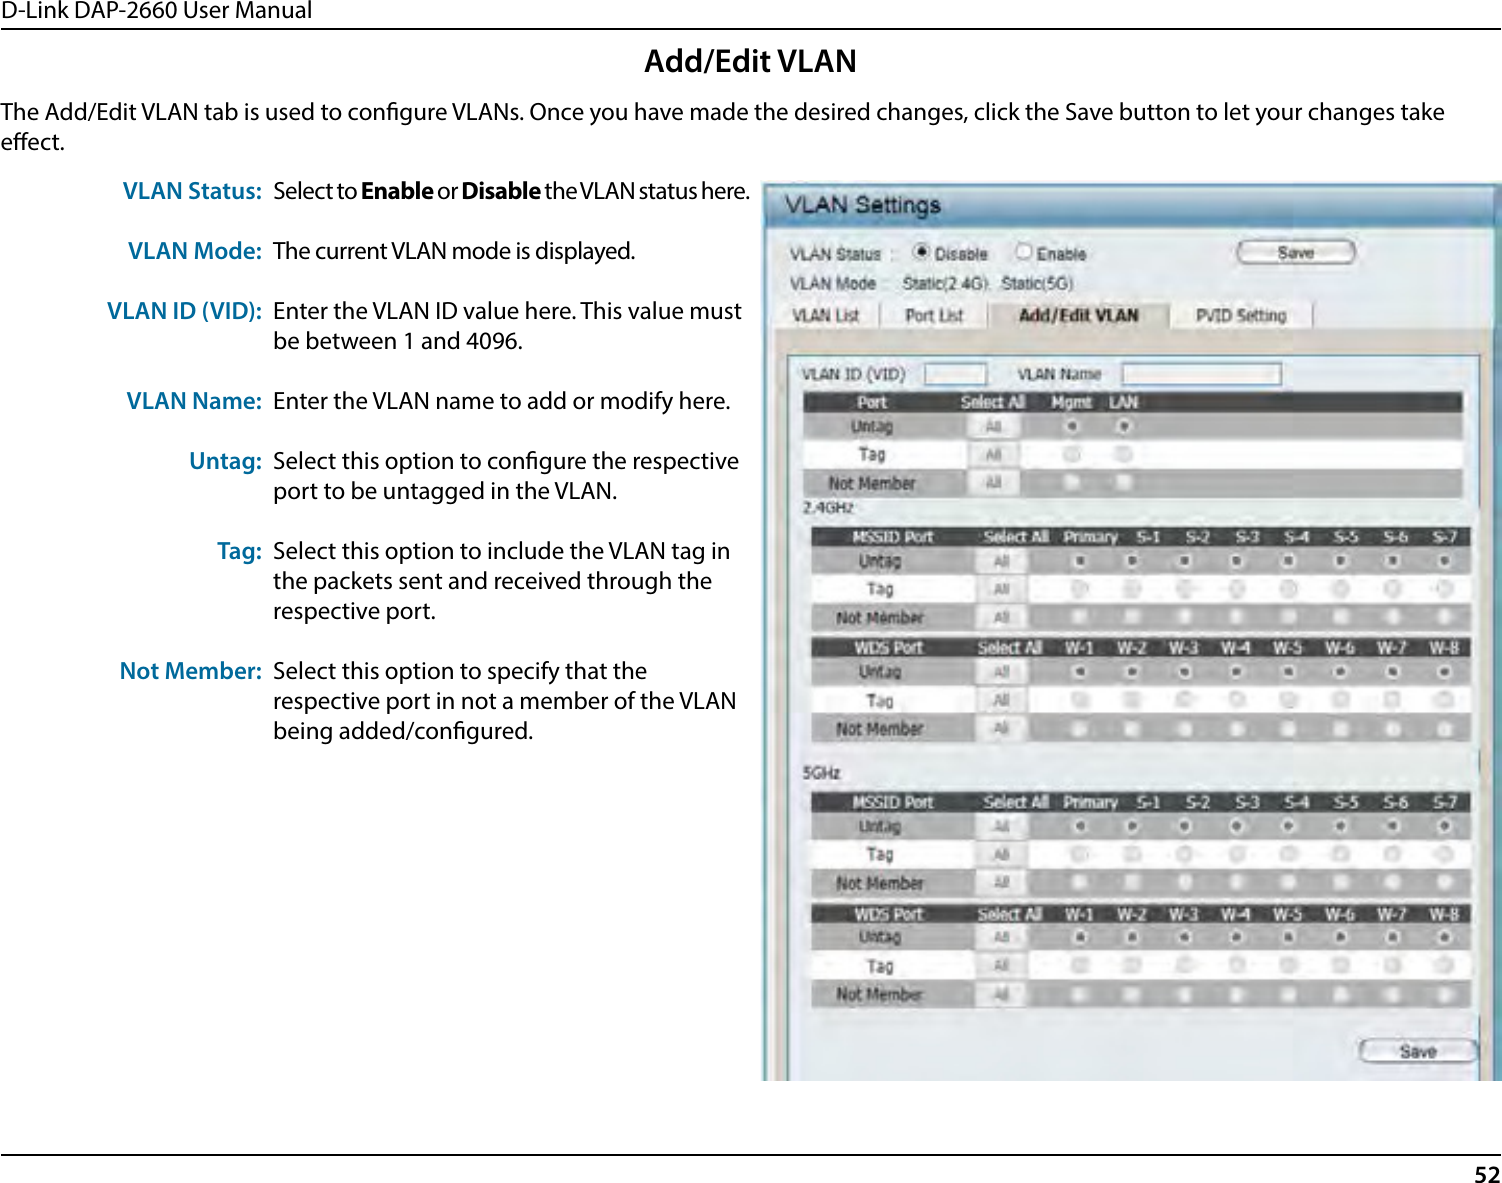 D-Link DAP-2660 User Manual52The Add/Edit VLAN tab is used to congure VLANs. Once you have made the desired changes, click the Save button to let your changes take eect.VLAN Status:VLAN Mode:VLAN ID (VID):VLAN Name:Untag:Tag:Not Member:Select to Enable or Disable the VLAN status here.The current VLAN mode is displayed.Enter the VLAN ID value here. This value must be between 1 and 4096.Enter the VLAN name to add or modify here.Select this option to congure the respective port to be untagged in the VLAN.Select this option to include the VLAN tag in the packets sent and received through the respective port.Select this option to specify that the respective port in not a member of the VLAN being added/congured.Add/Edit VLAN